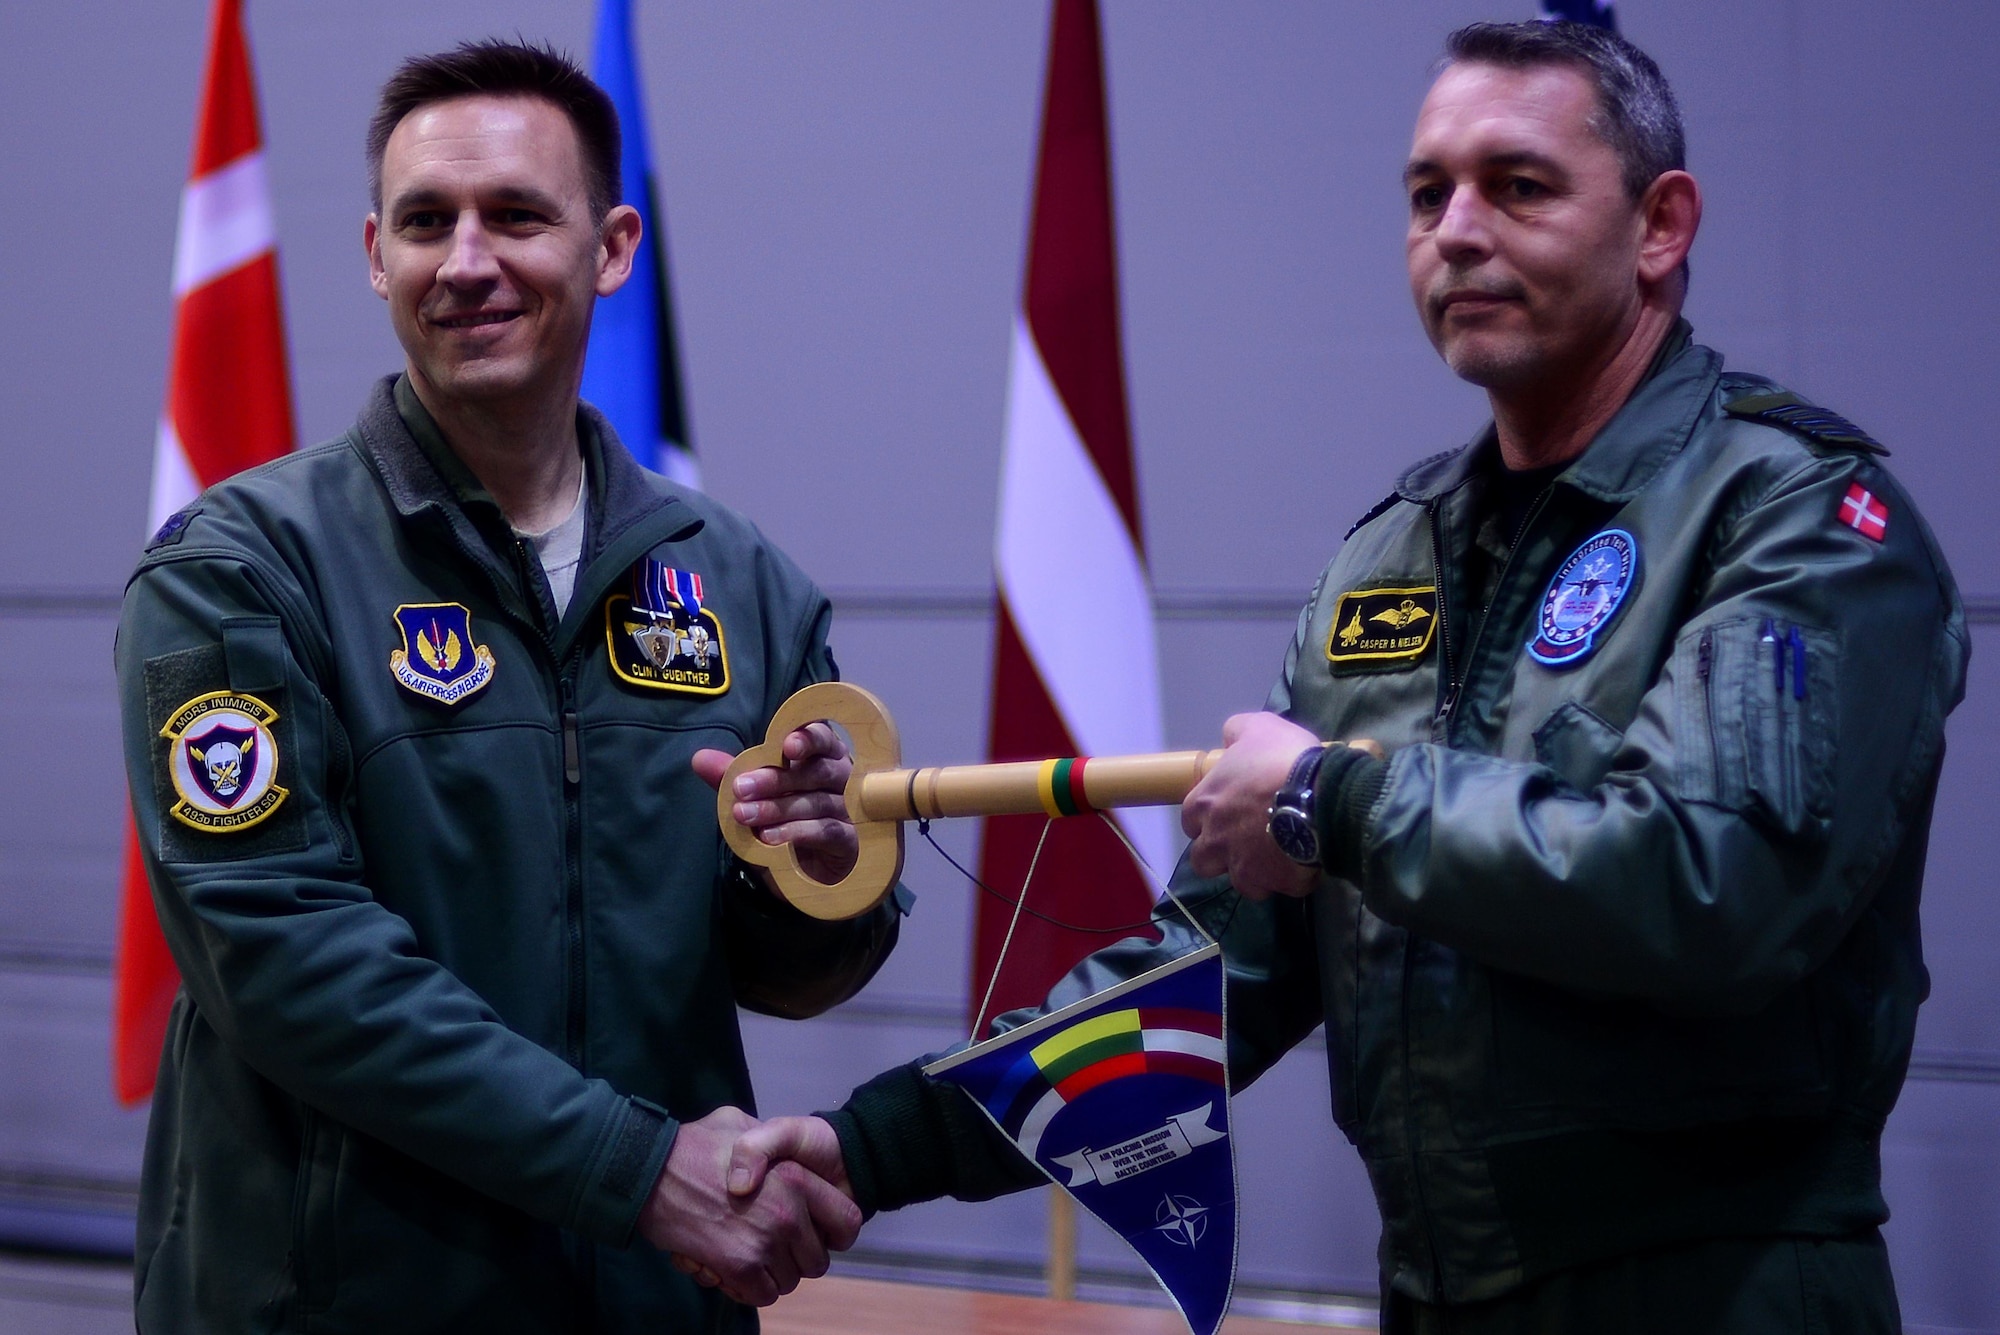 U.S. Air Force Lt. Col. Clint Guenther, 493rd Expeditionary Fighter Squadron detachment commander, presents the key to the Baltic Air Policing mission to Royal Dannish air force commander Col. Uffe Holstener during the official Baltic Air Policing hand-over, take-over ceremony at Šiauliai Air Base, Lithuania, Jan. 8, 2018. This is Denmark's sixth Baltic Air Policing rotation since operations began in 2004. (U.S. Air Force photo/ Tech. Sgt. Matthew Plew)